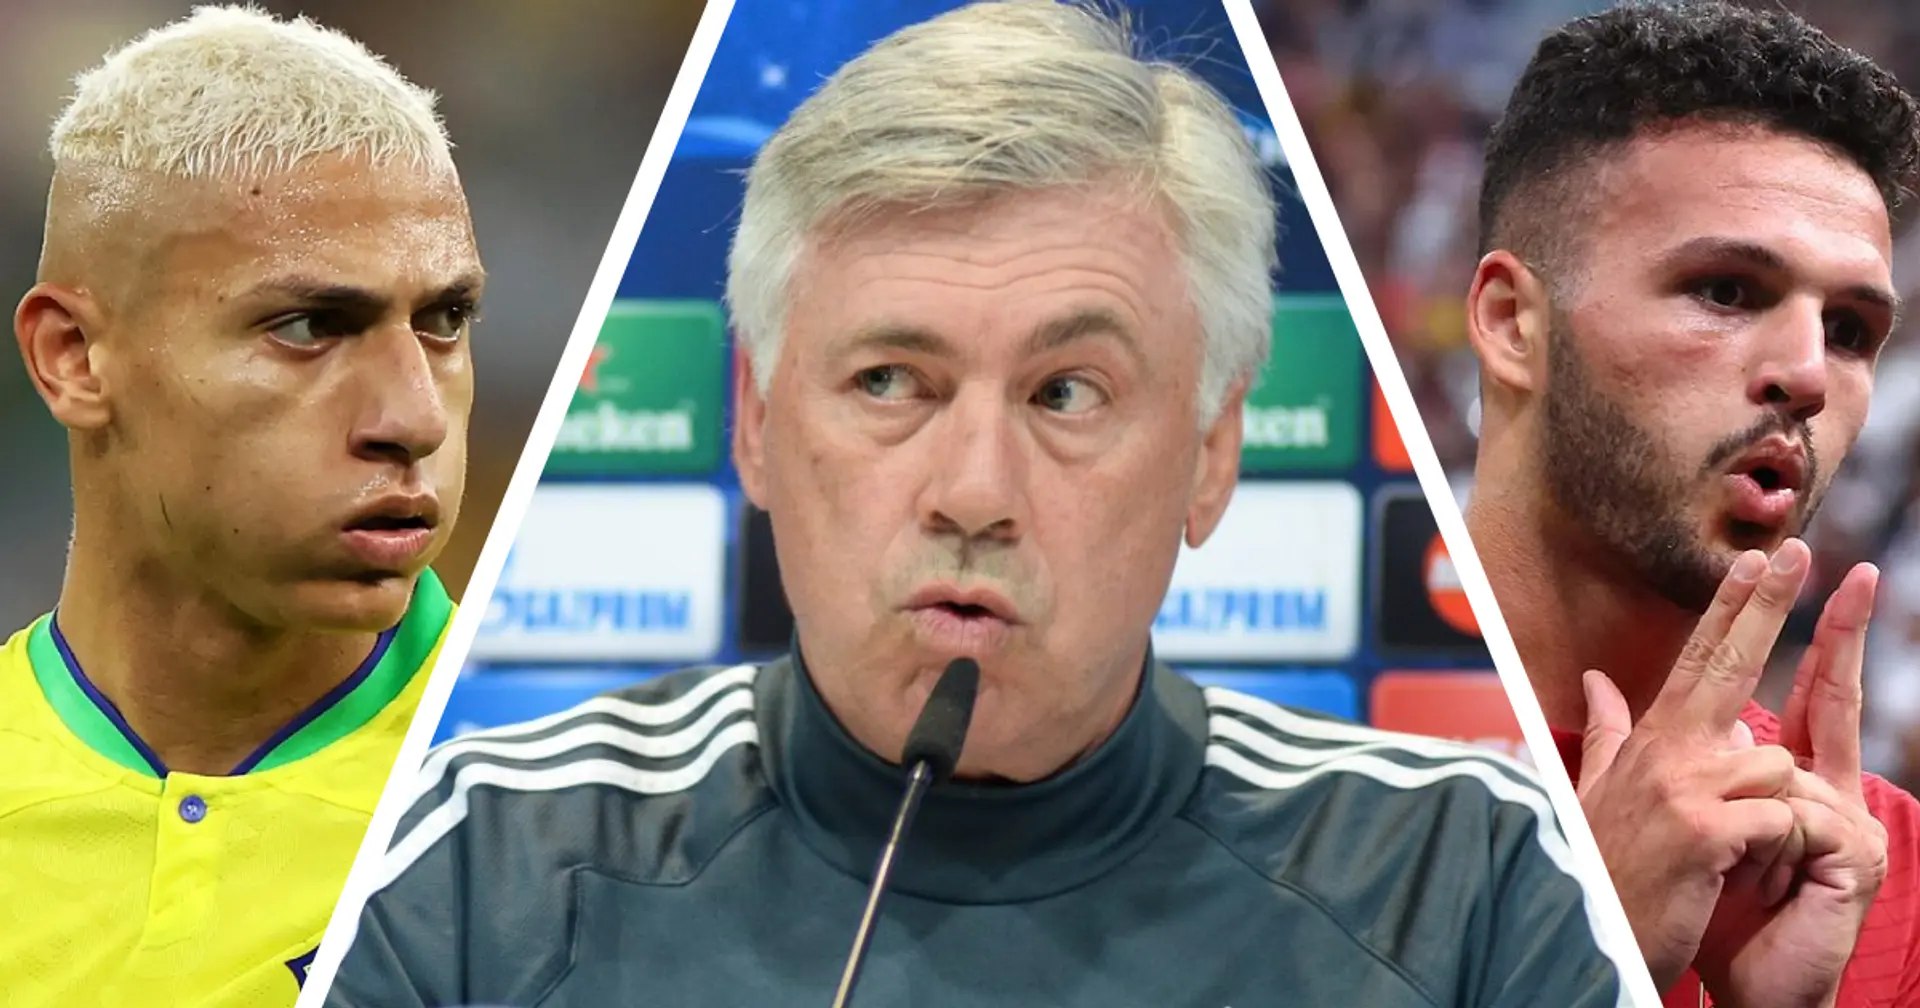 Ancelotti names 6 strikers who will replace Benzema's generation